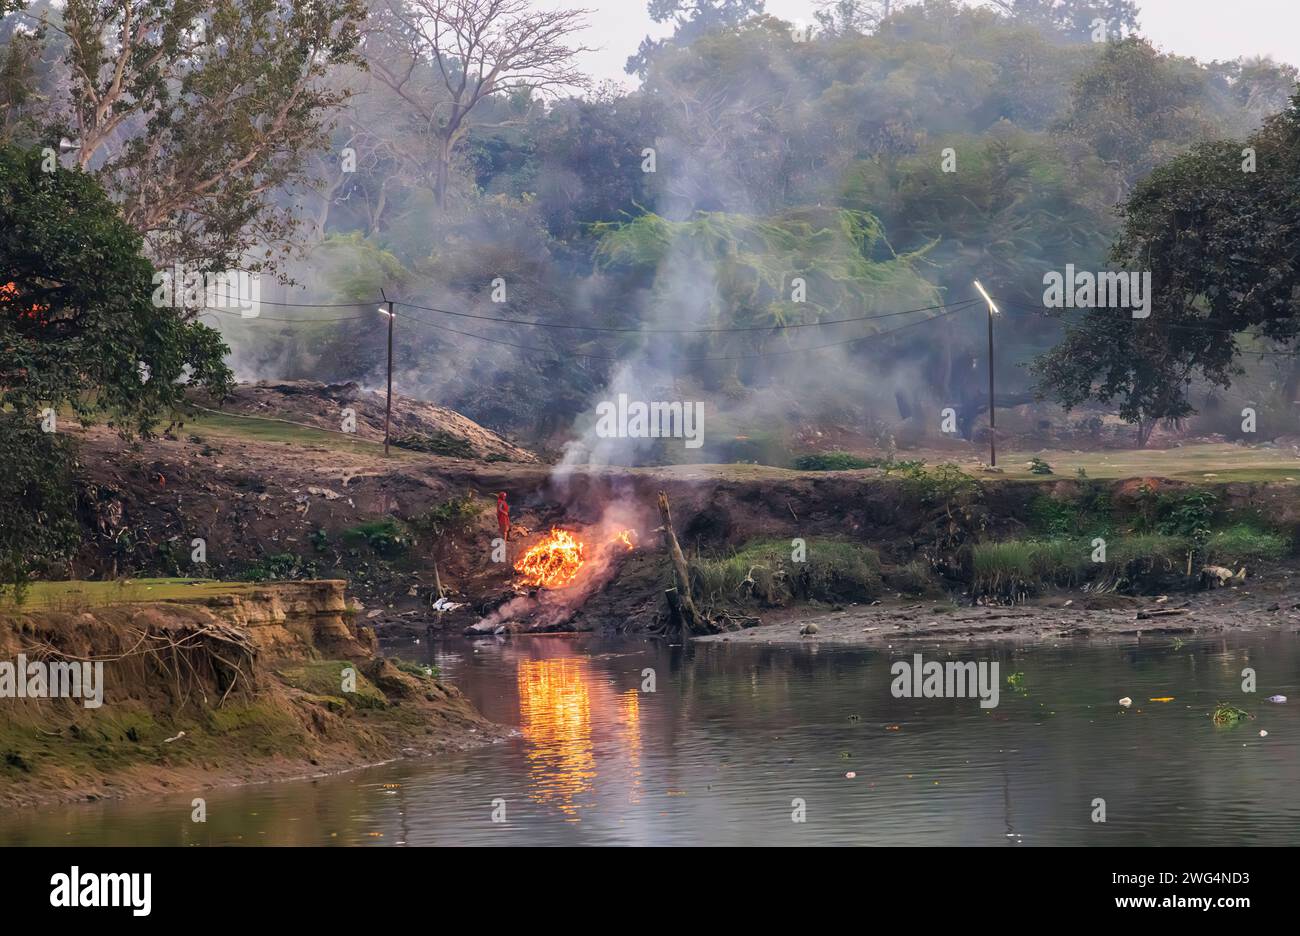 Traditional Hindu funeral cremation pyres burning at Jagaddal Ghat on the banks of the Hooghly River at dusk in North Barrackpore, West Bengal, India Stock Photo